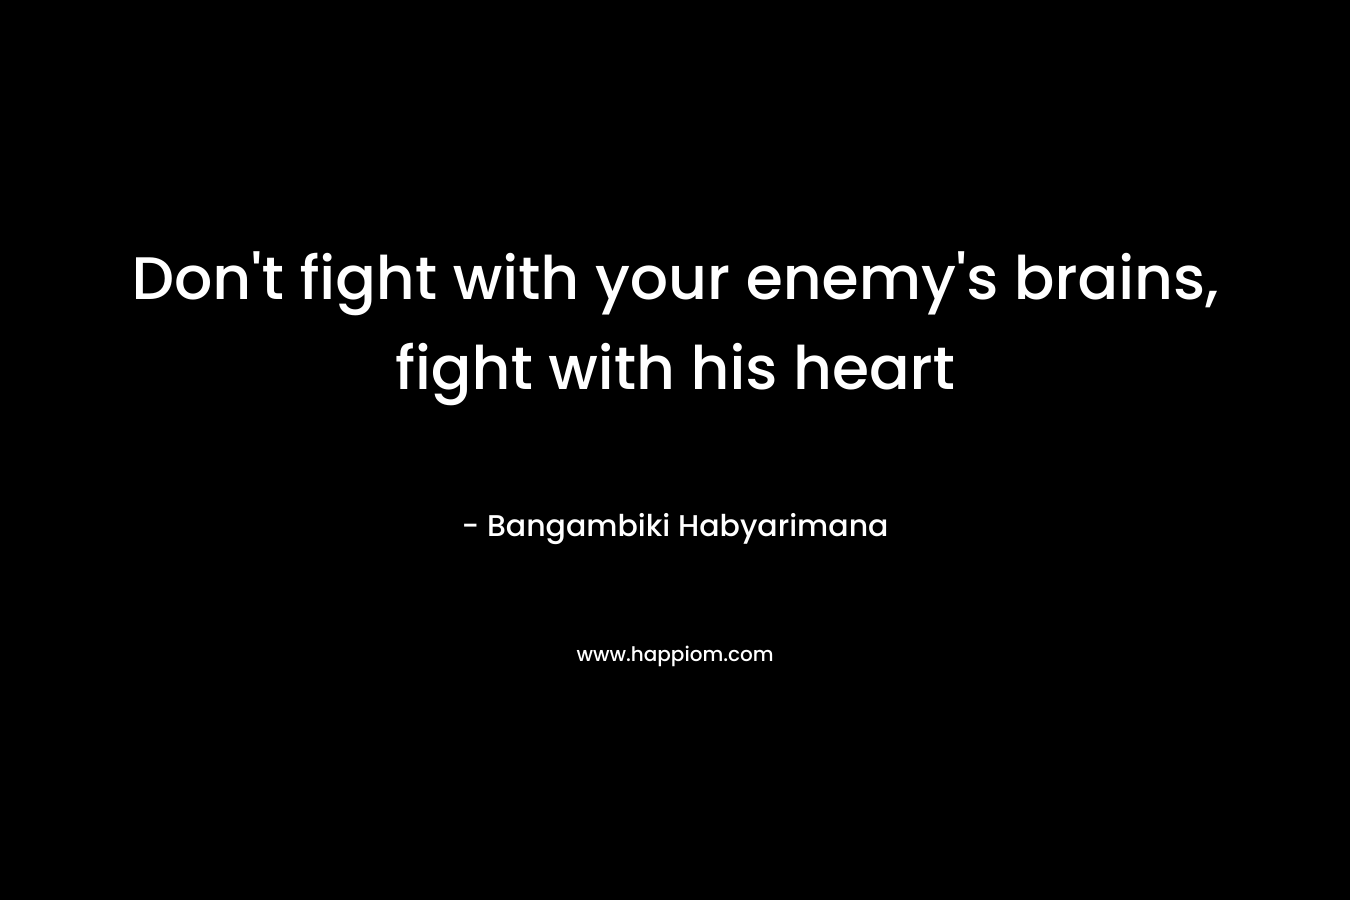 Don't fight with your enemy's brains, fight with his heart